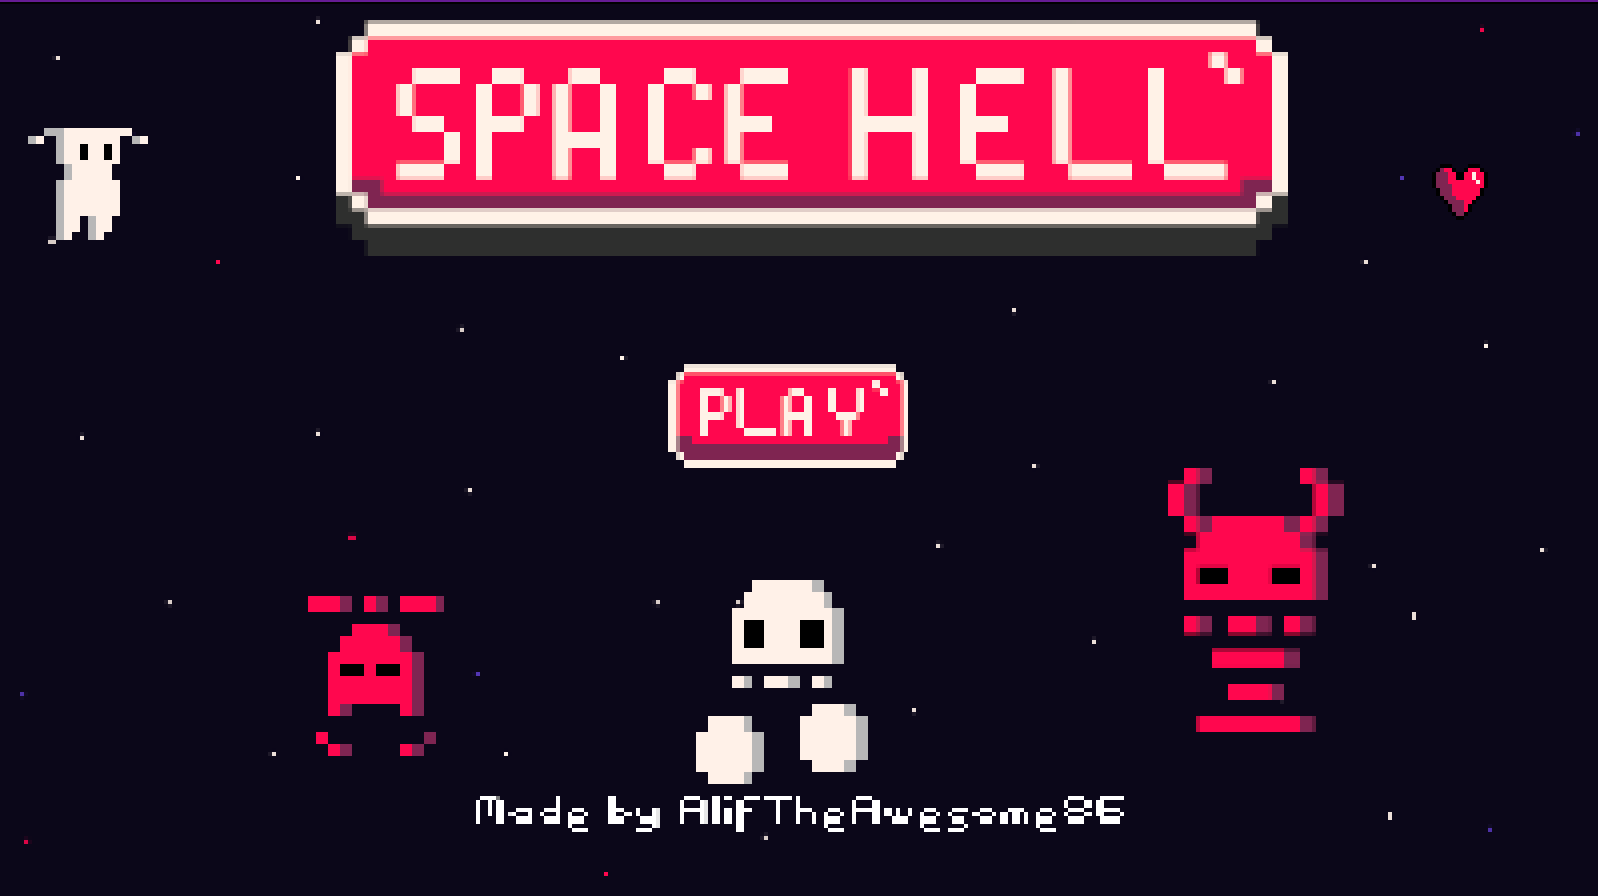 Space Hell